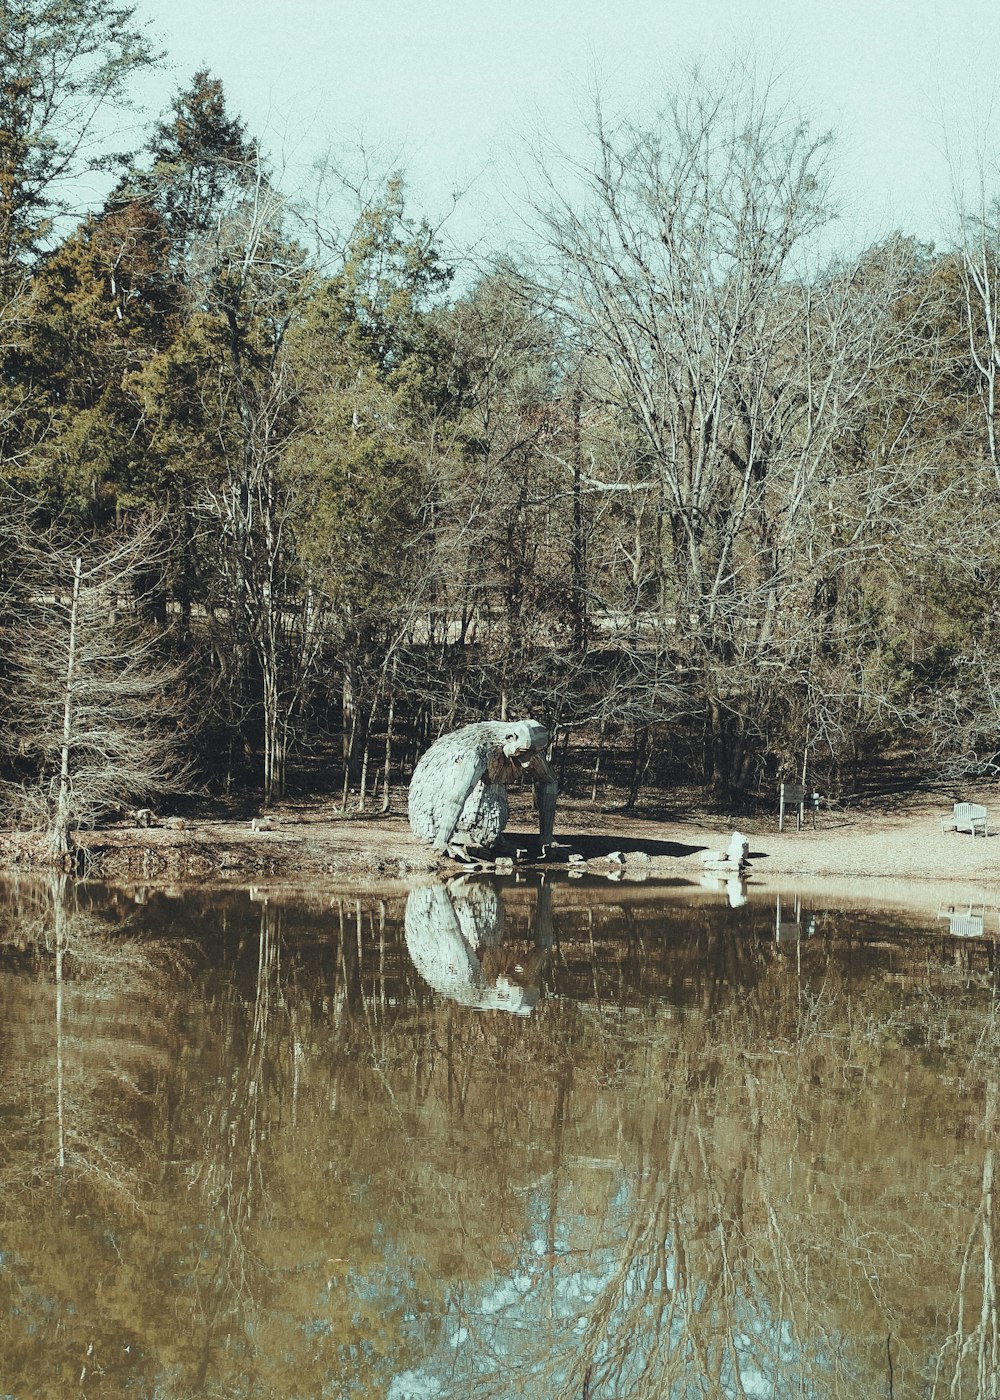 a person sitting on a bench near a body of water